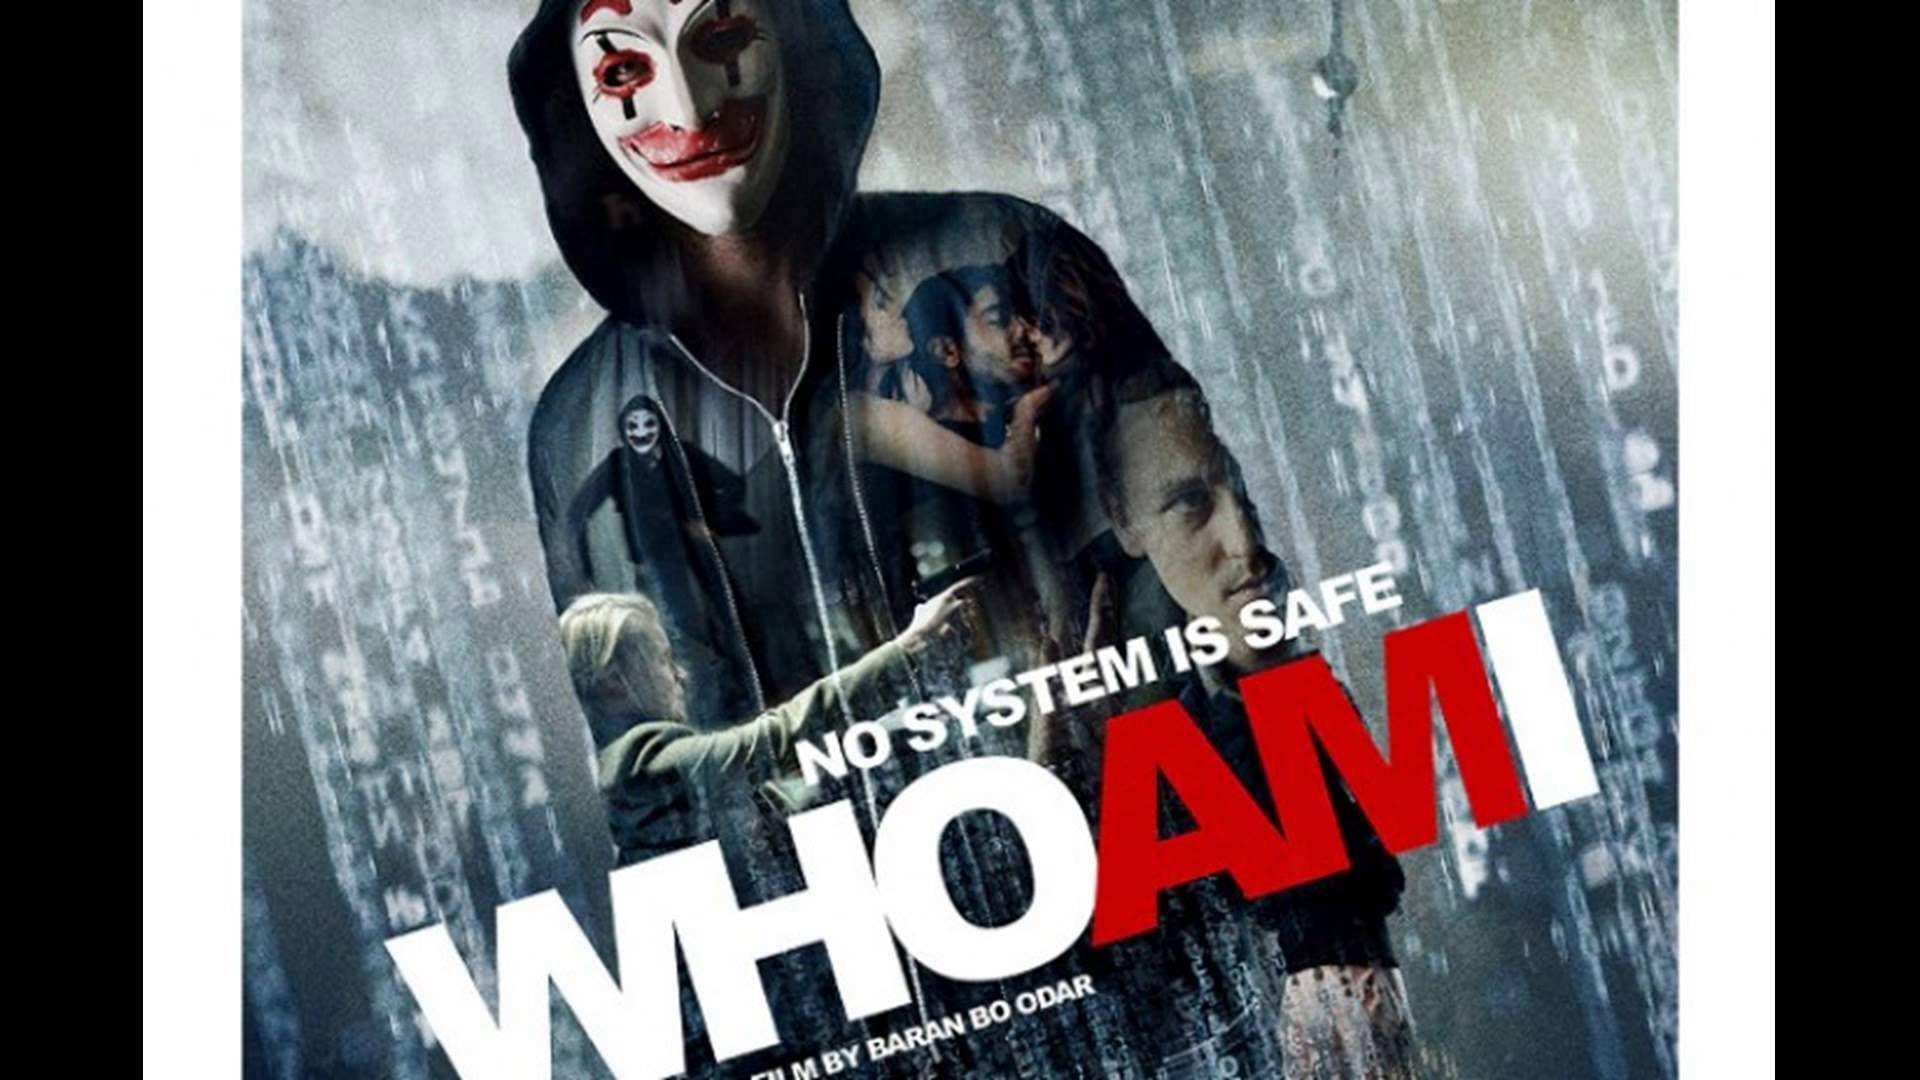 Who Am I System is Safe Wallpaper Am I System is